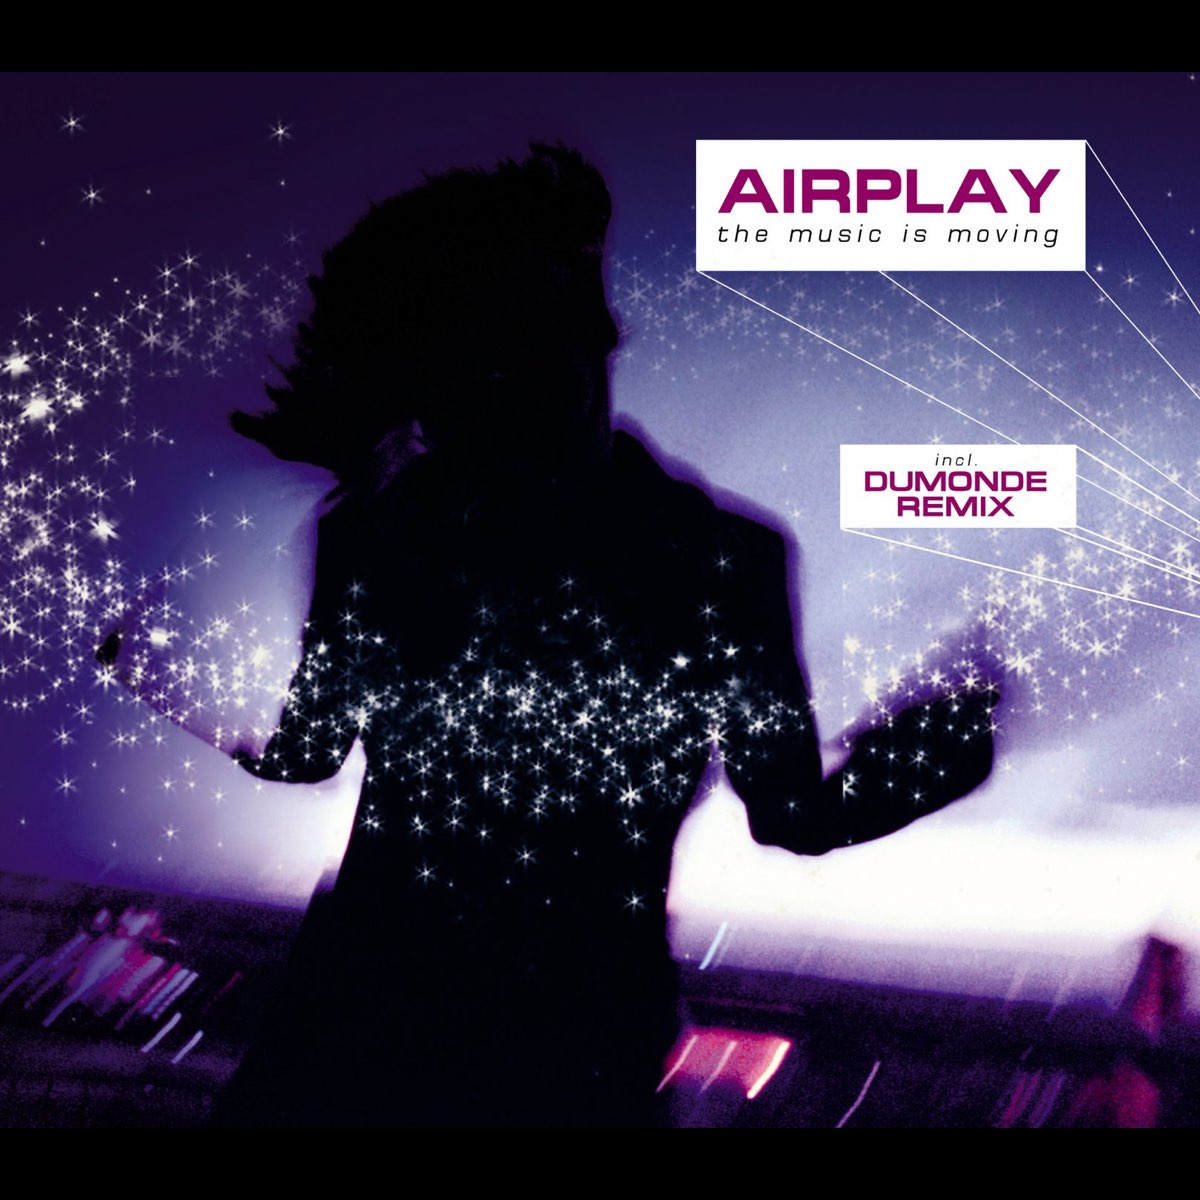 The unforgiven airplay mix. Airplay the Music is moving. Airplay - for your Love. The Music is New. GDNR музыка из.